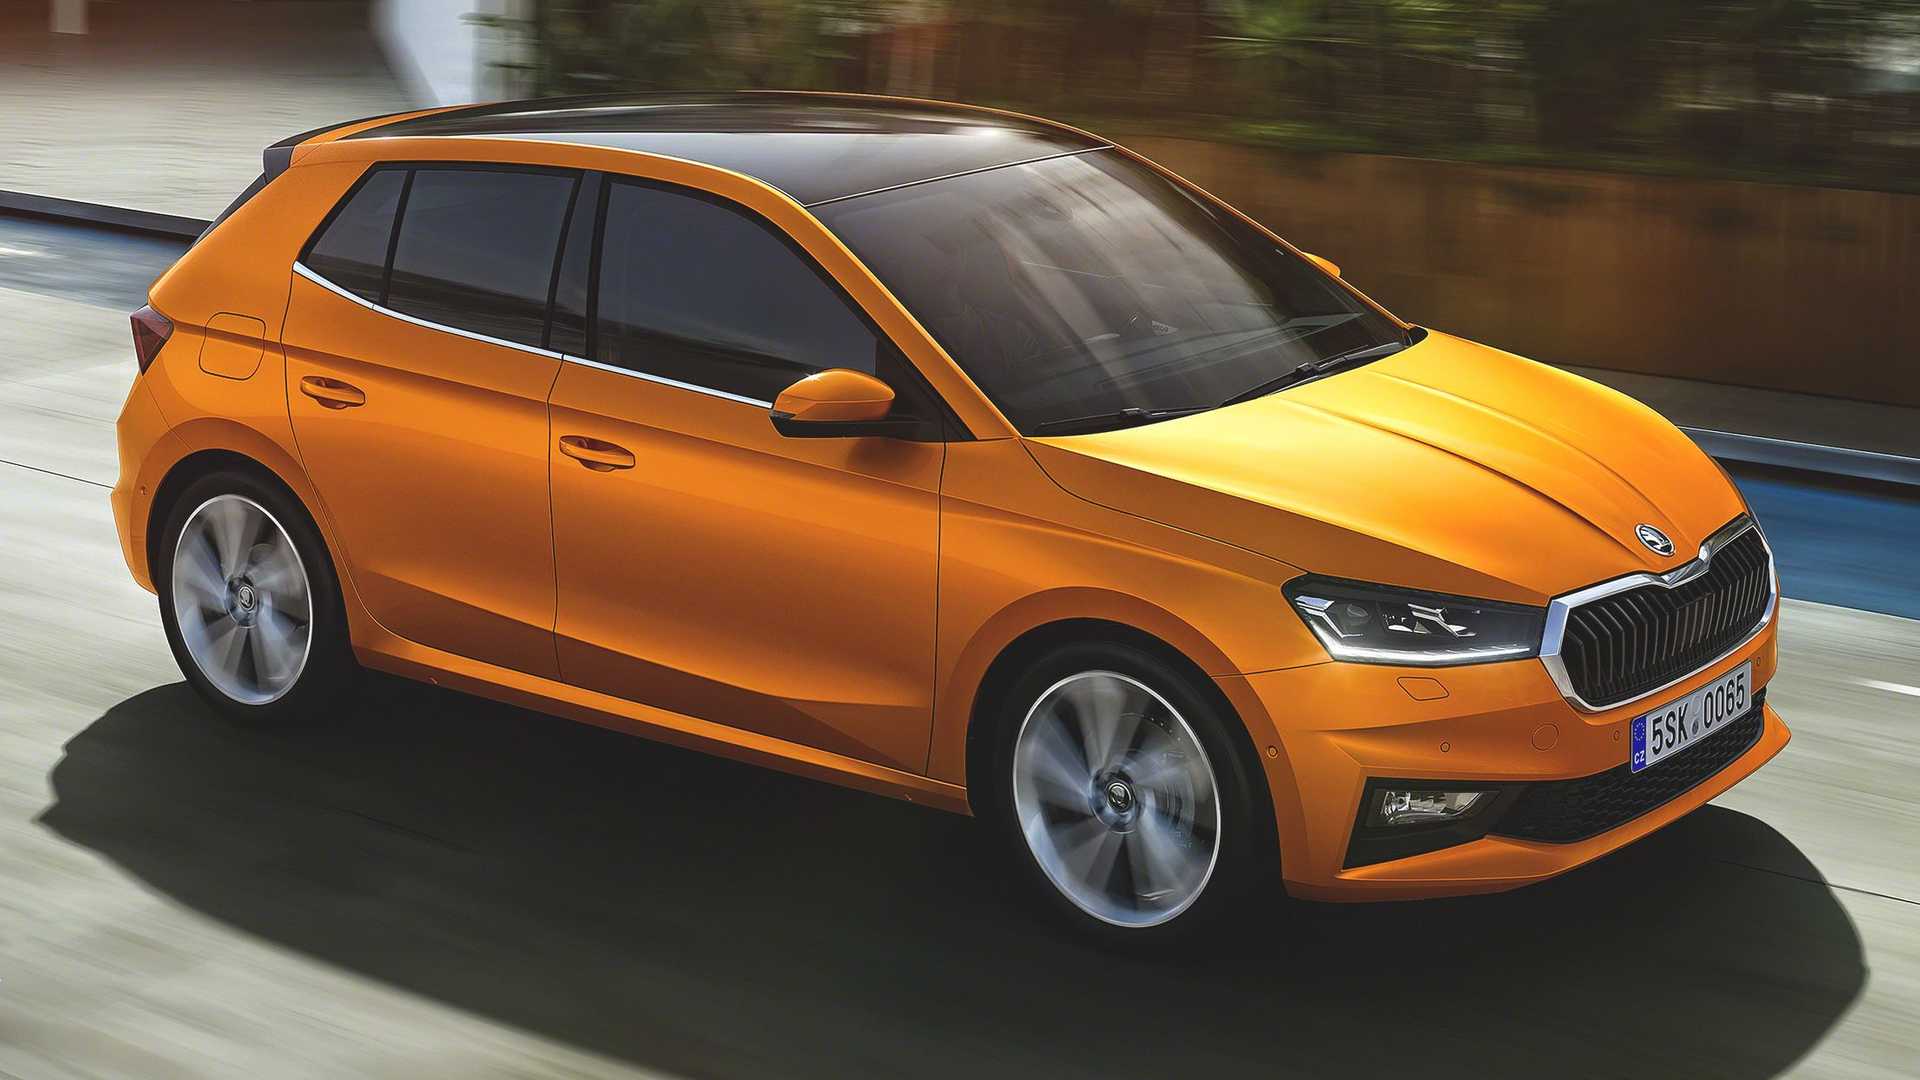 New Skoda Fabia Can Travel More Than 560 Miles On A Single Tank Of Gas